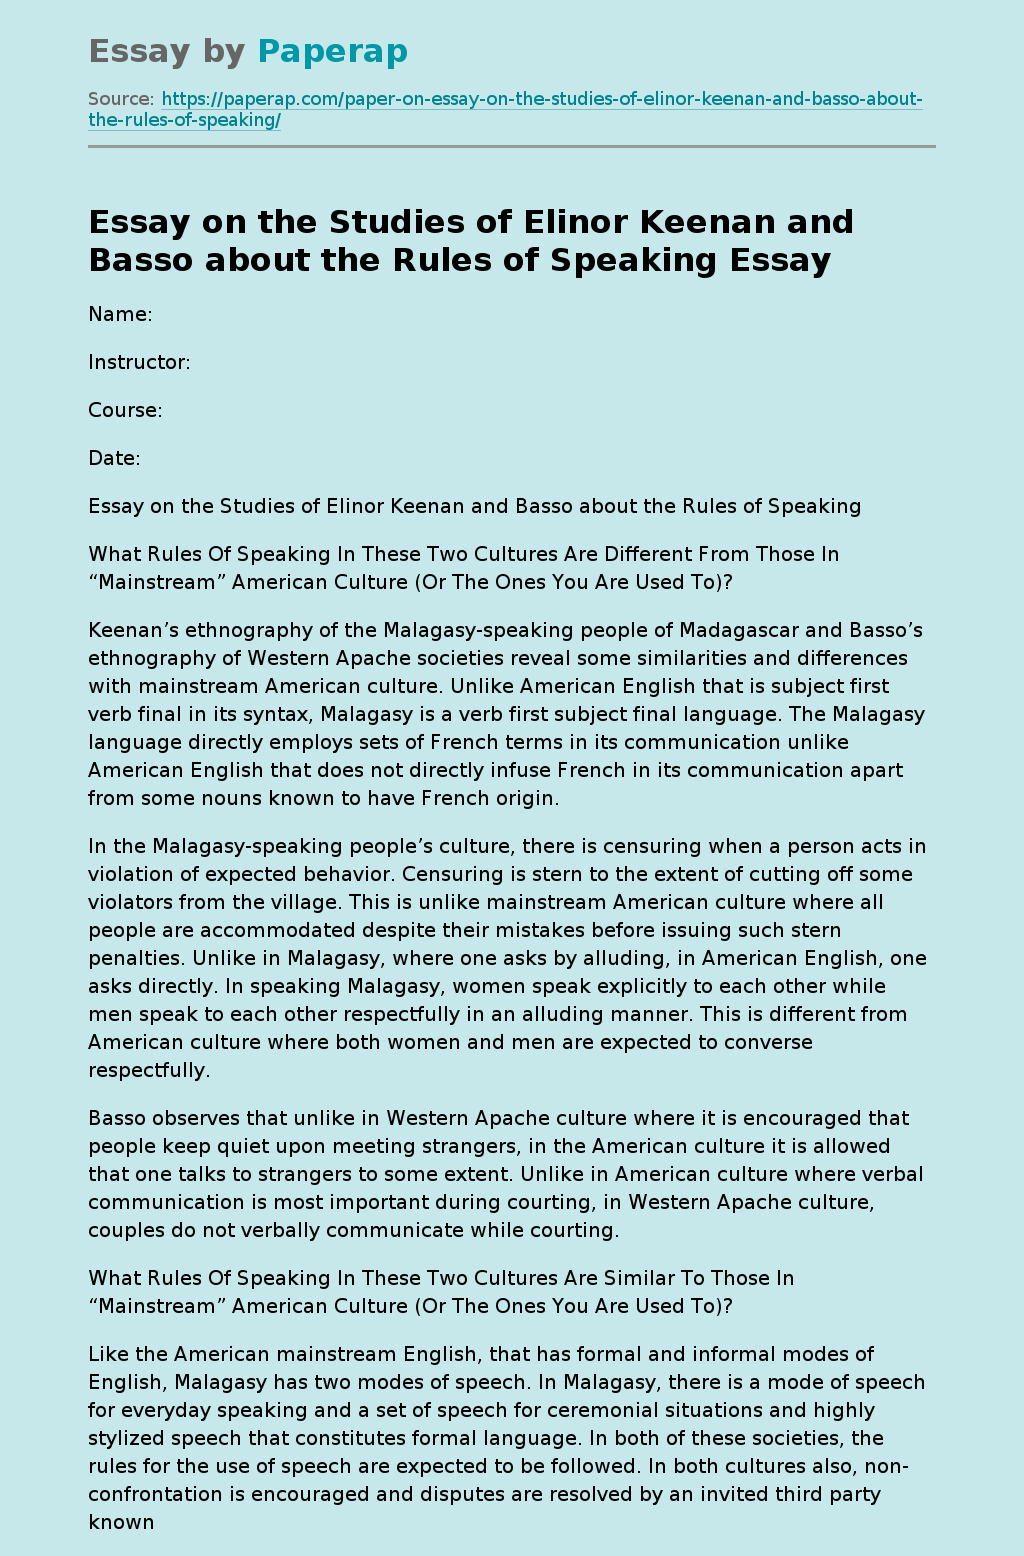 Essay on the Studies of Elinor Keenan and Basso about the Rules of Speaking